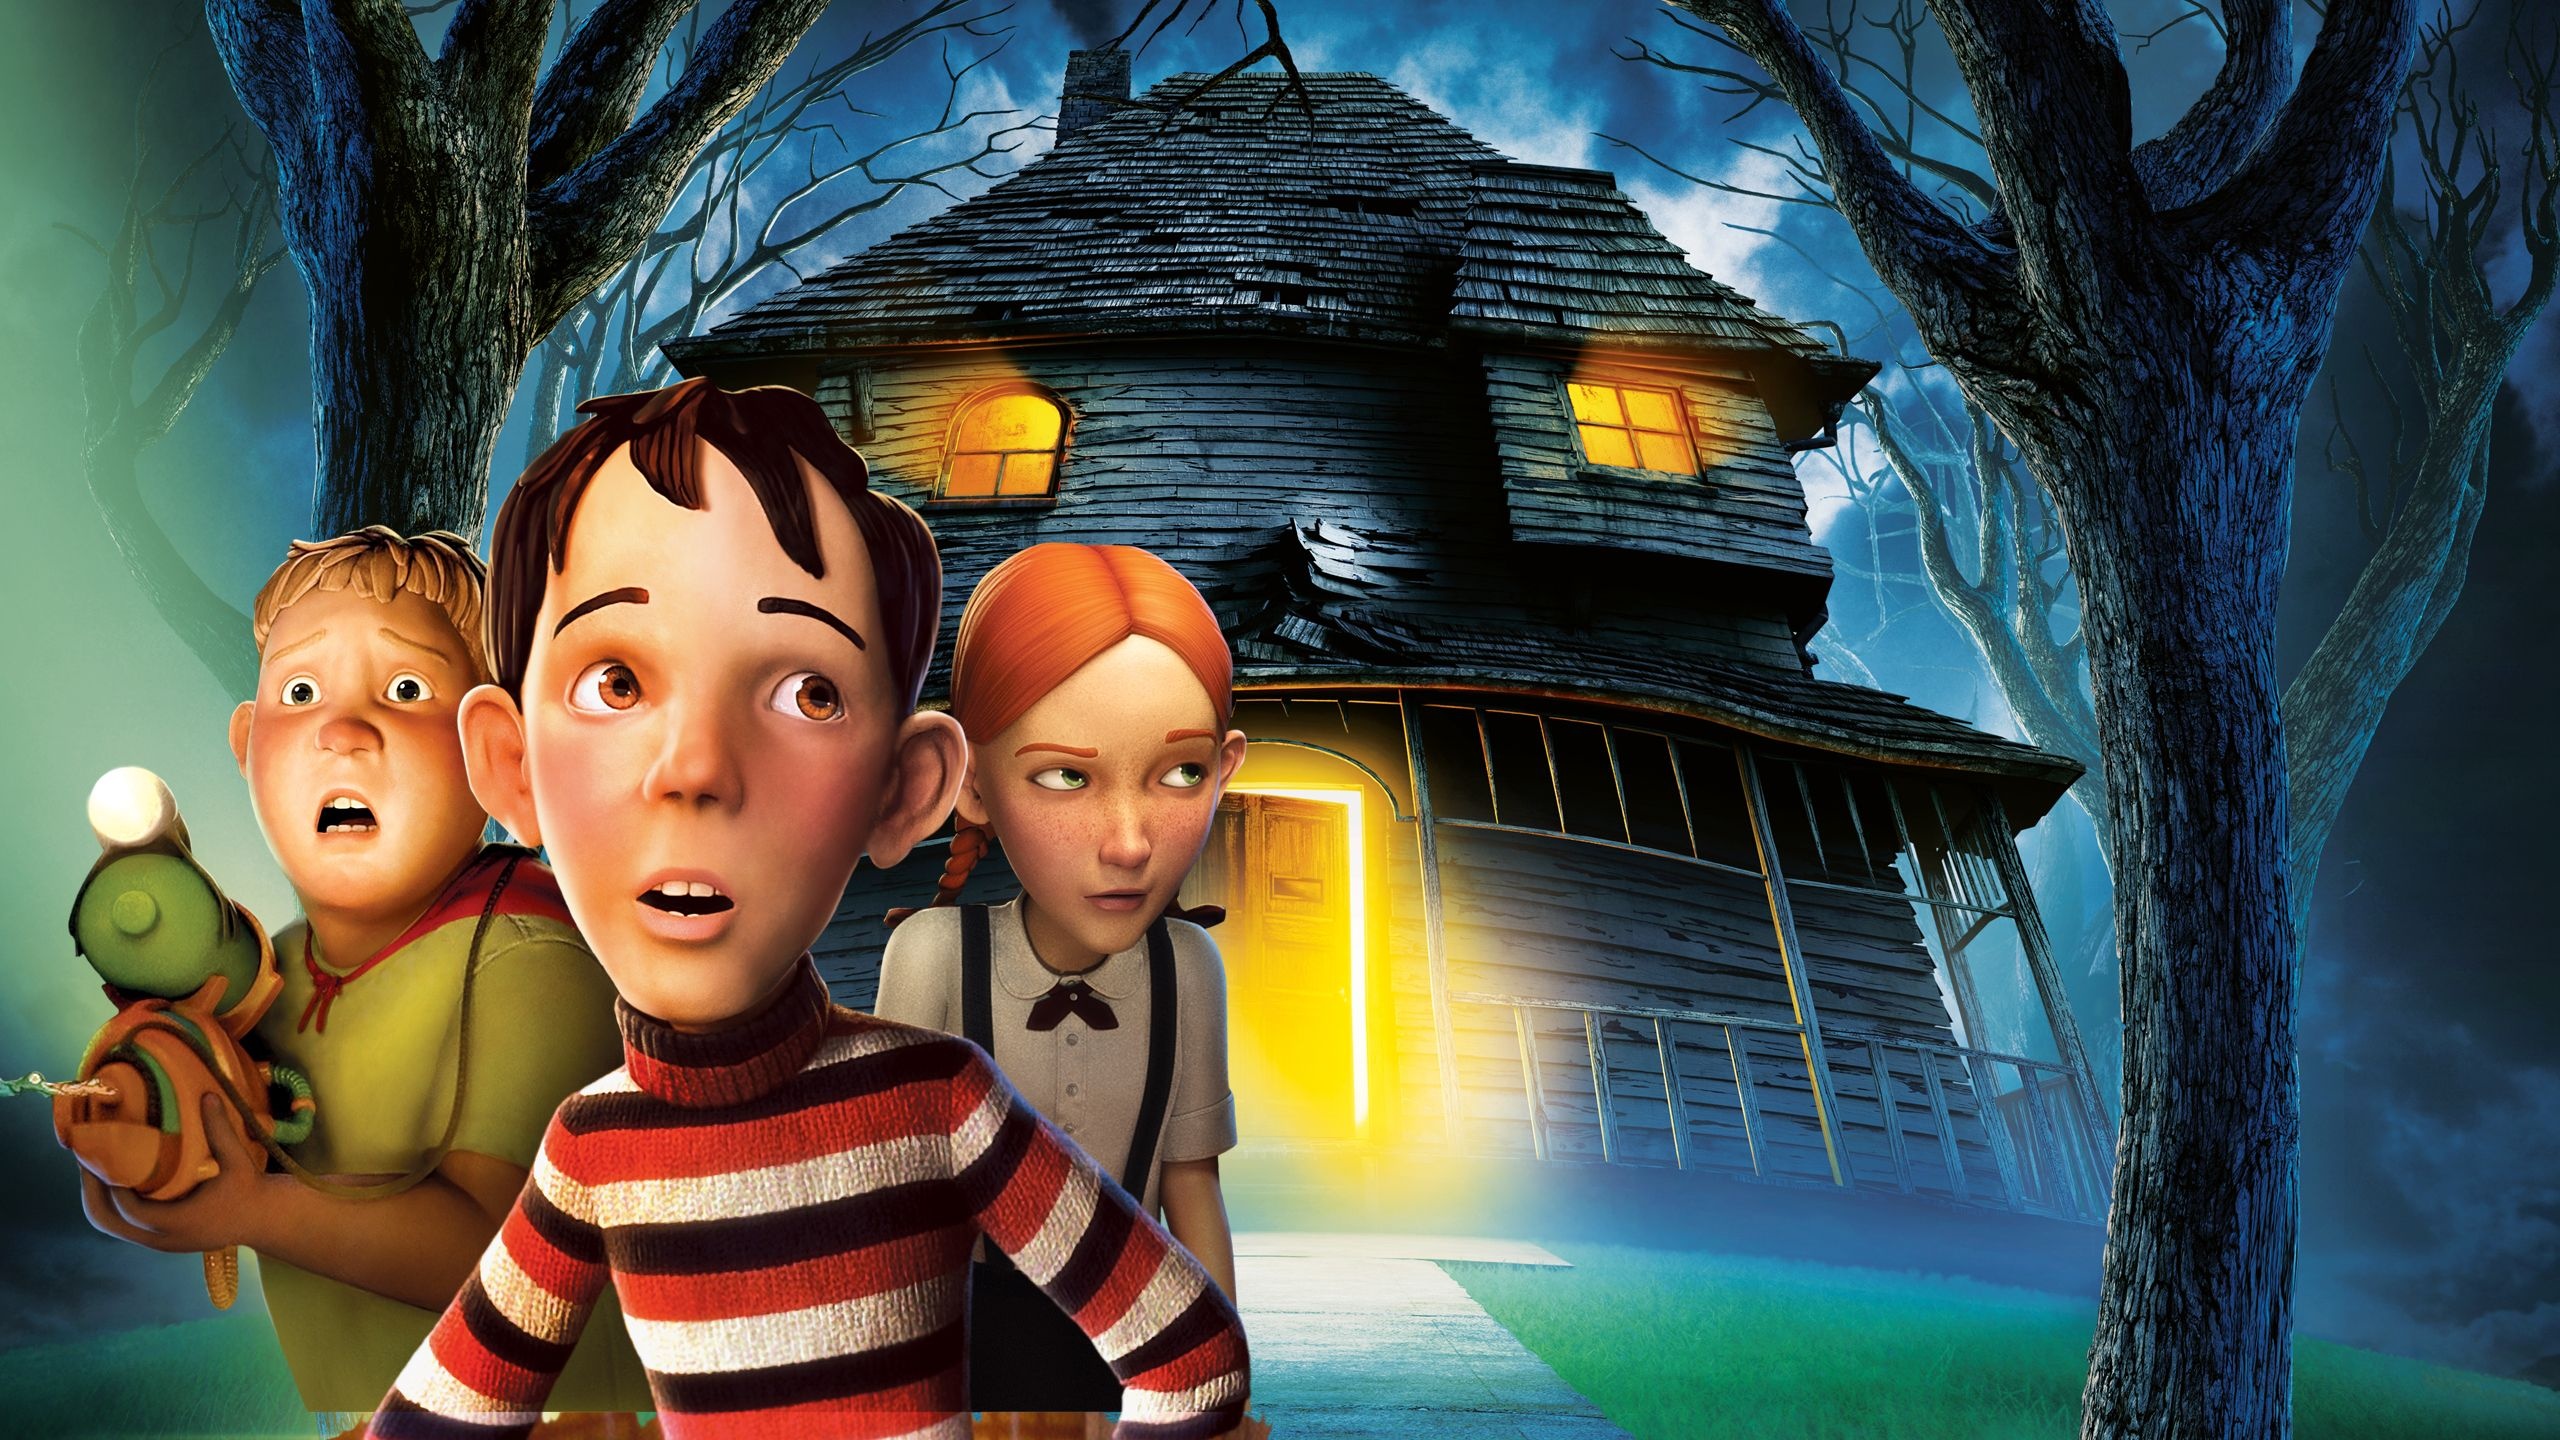 Monster House, Movies anywhere, Digital movie collection, Fun for all, 2560x1440 HD Desktop